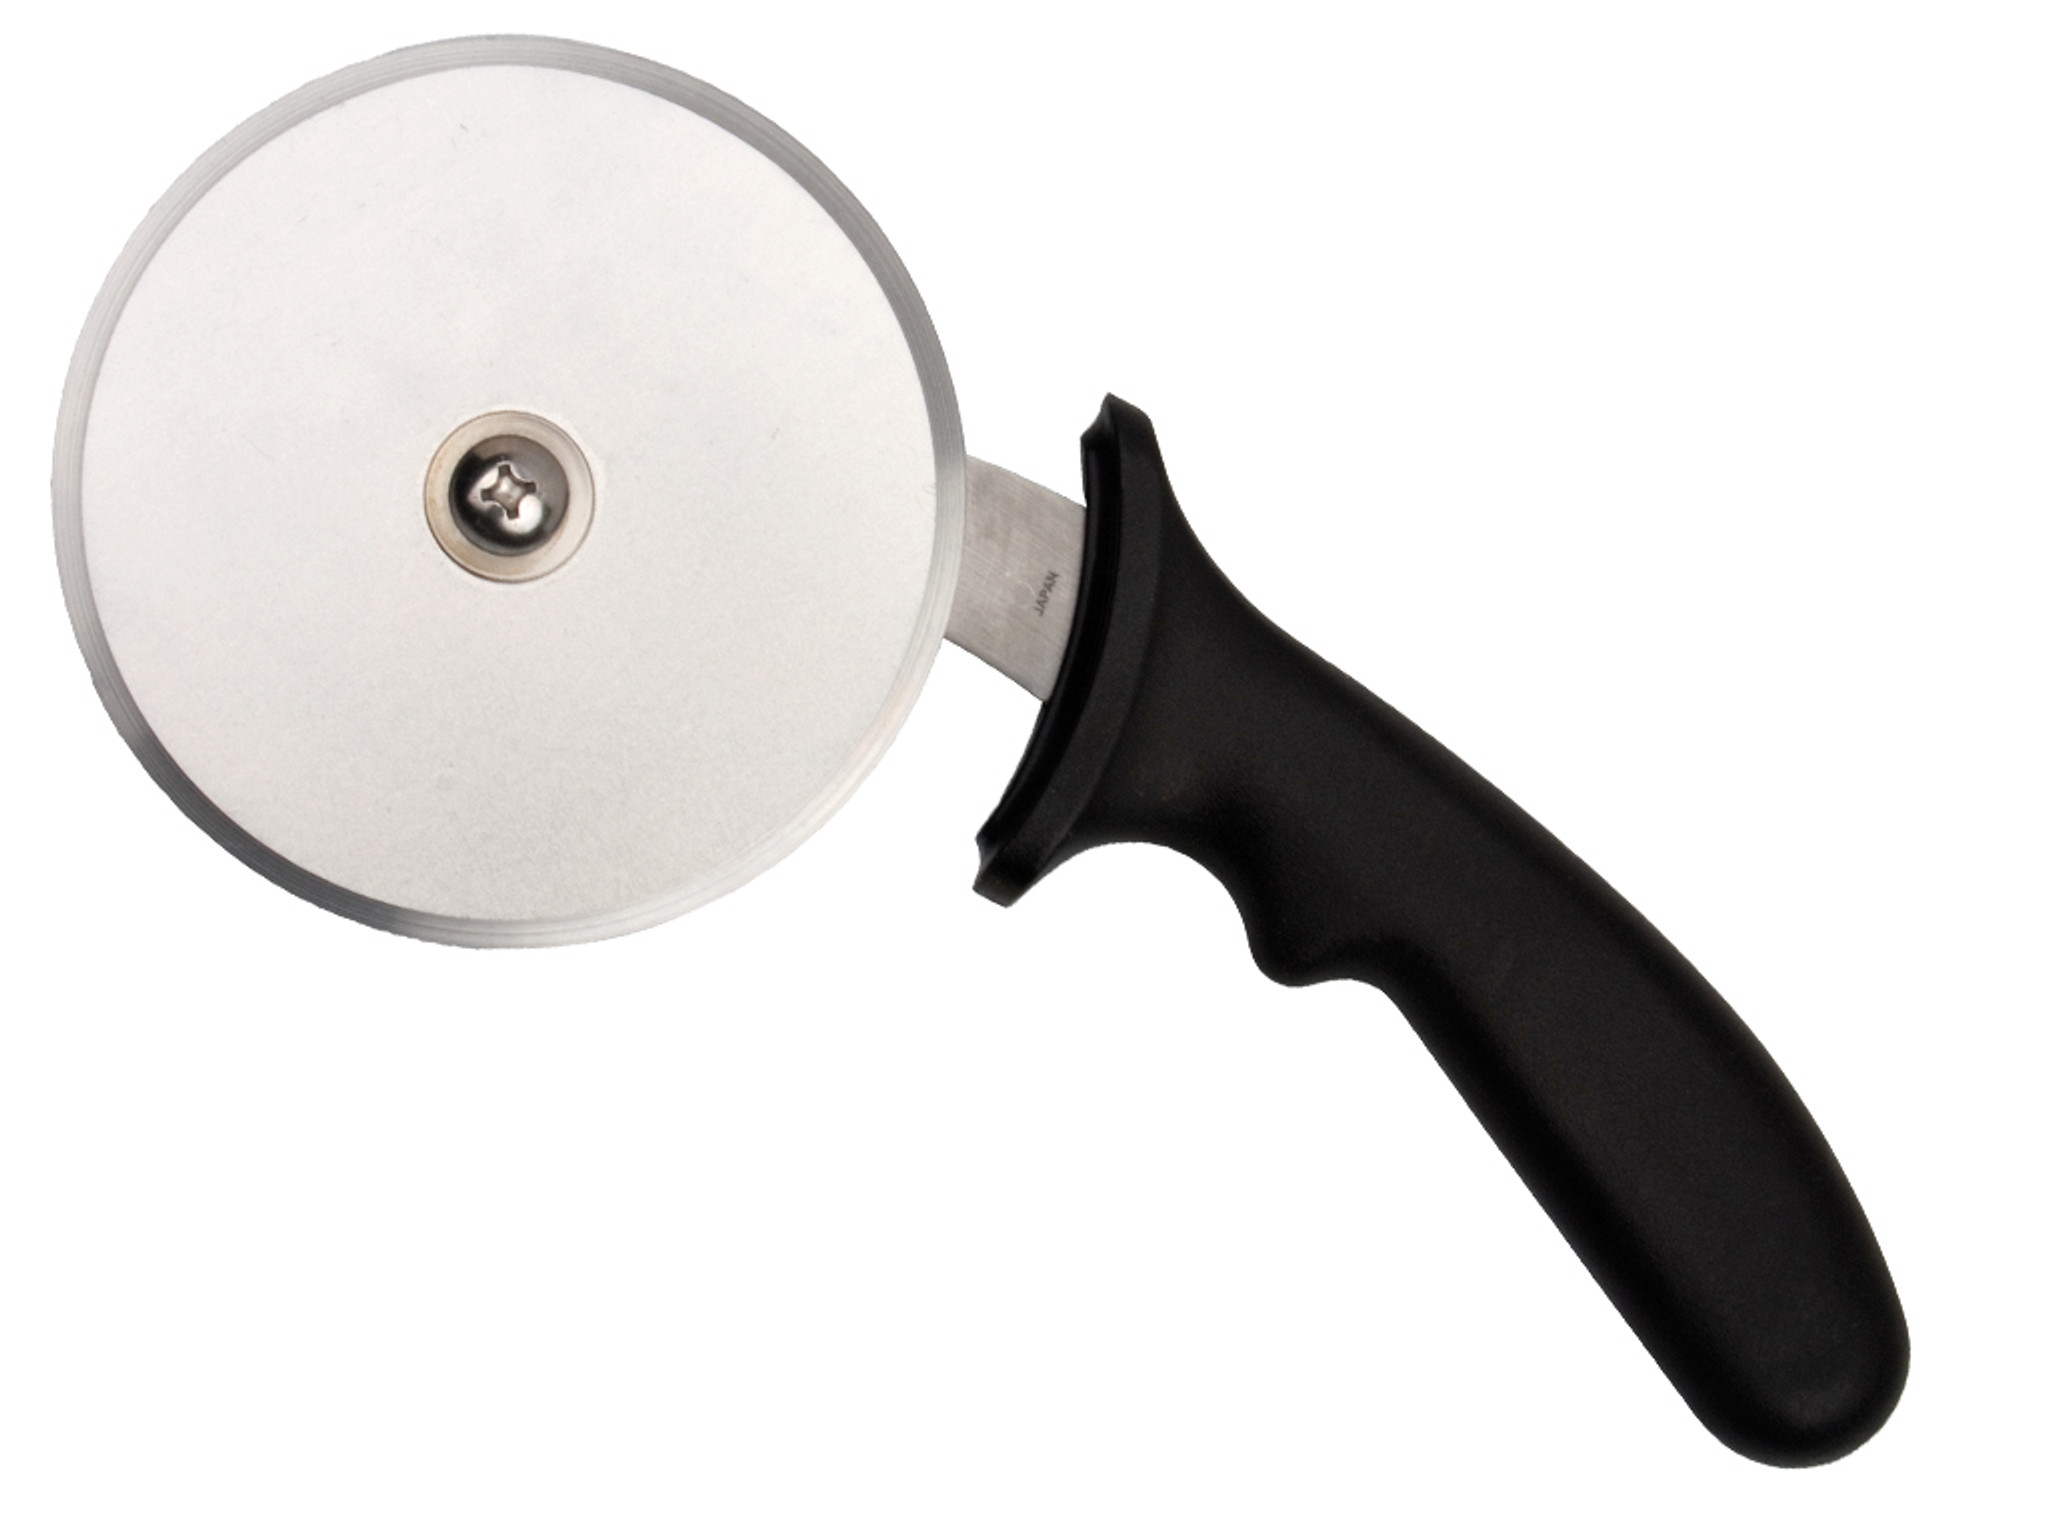 ARY 4 Stainless Steel Pizza Cutter with Soft Grip CG3000 Black Handle  Z30254